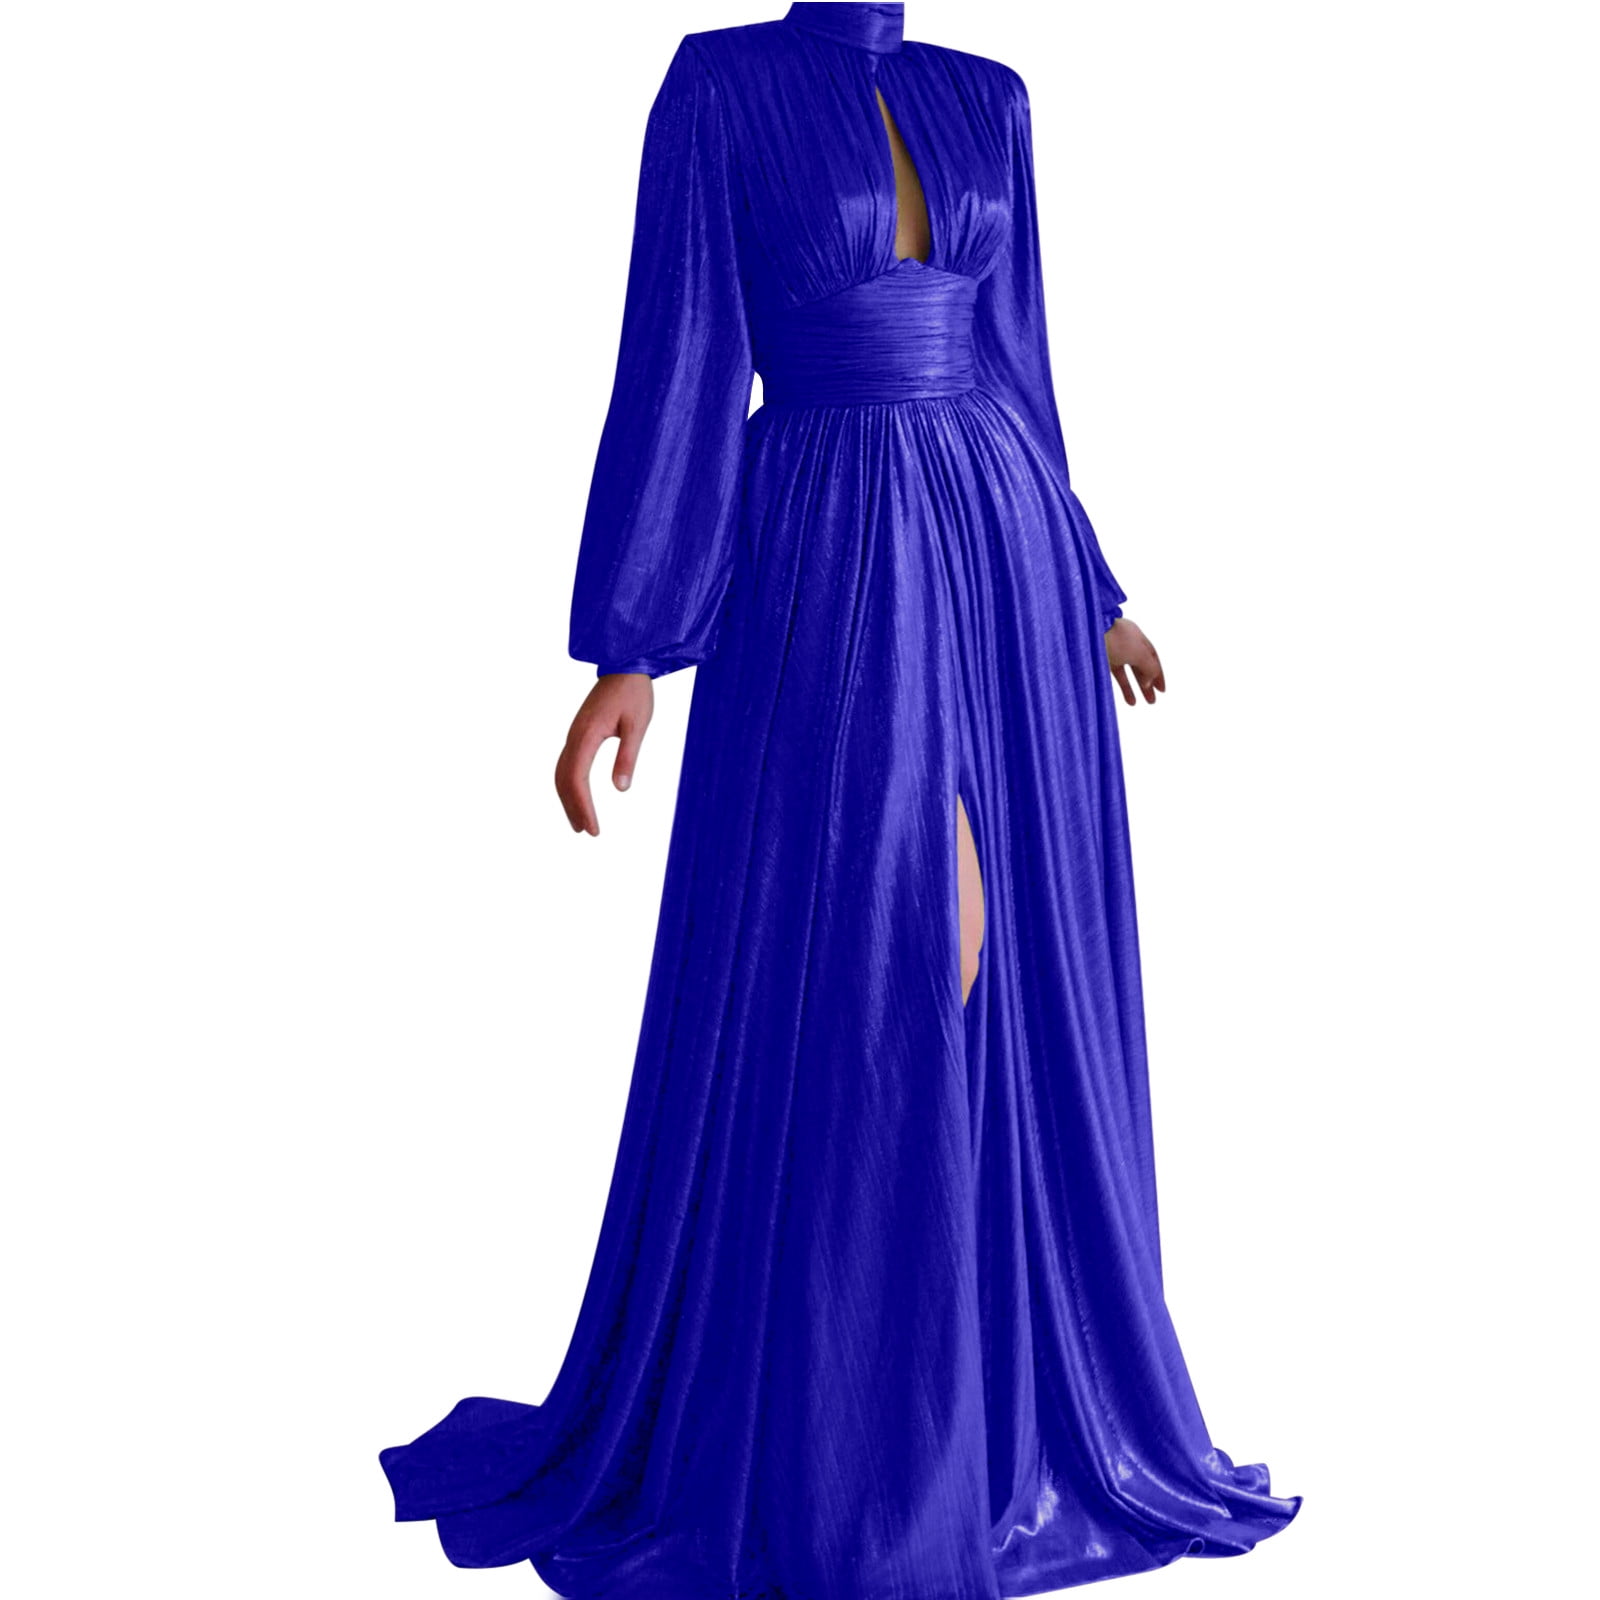 Women's Summer T Shirt Maxi Dress Batwing Sleeve,Cheap Sale Items,Today's  Deals in Prime,Clearance Items,Outlet Store Clearance Open, Women,Todays  Deals in Prime Lightning Deals